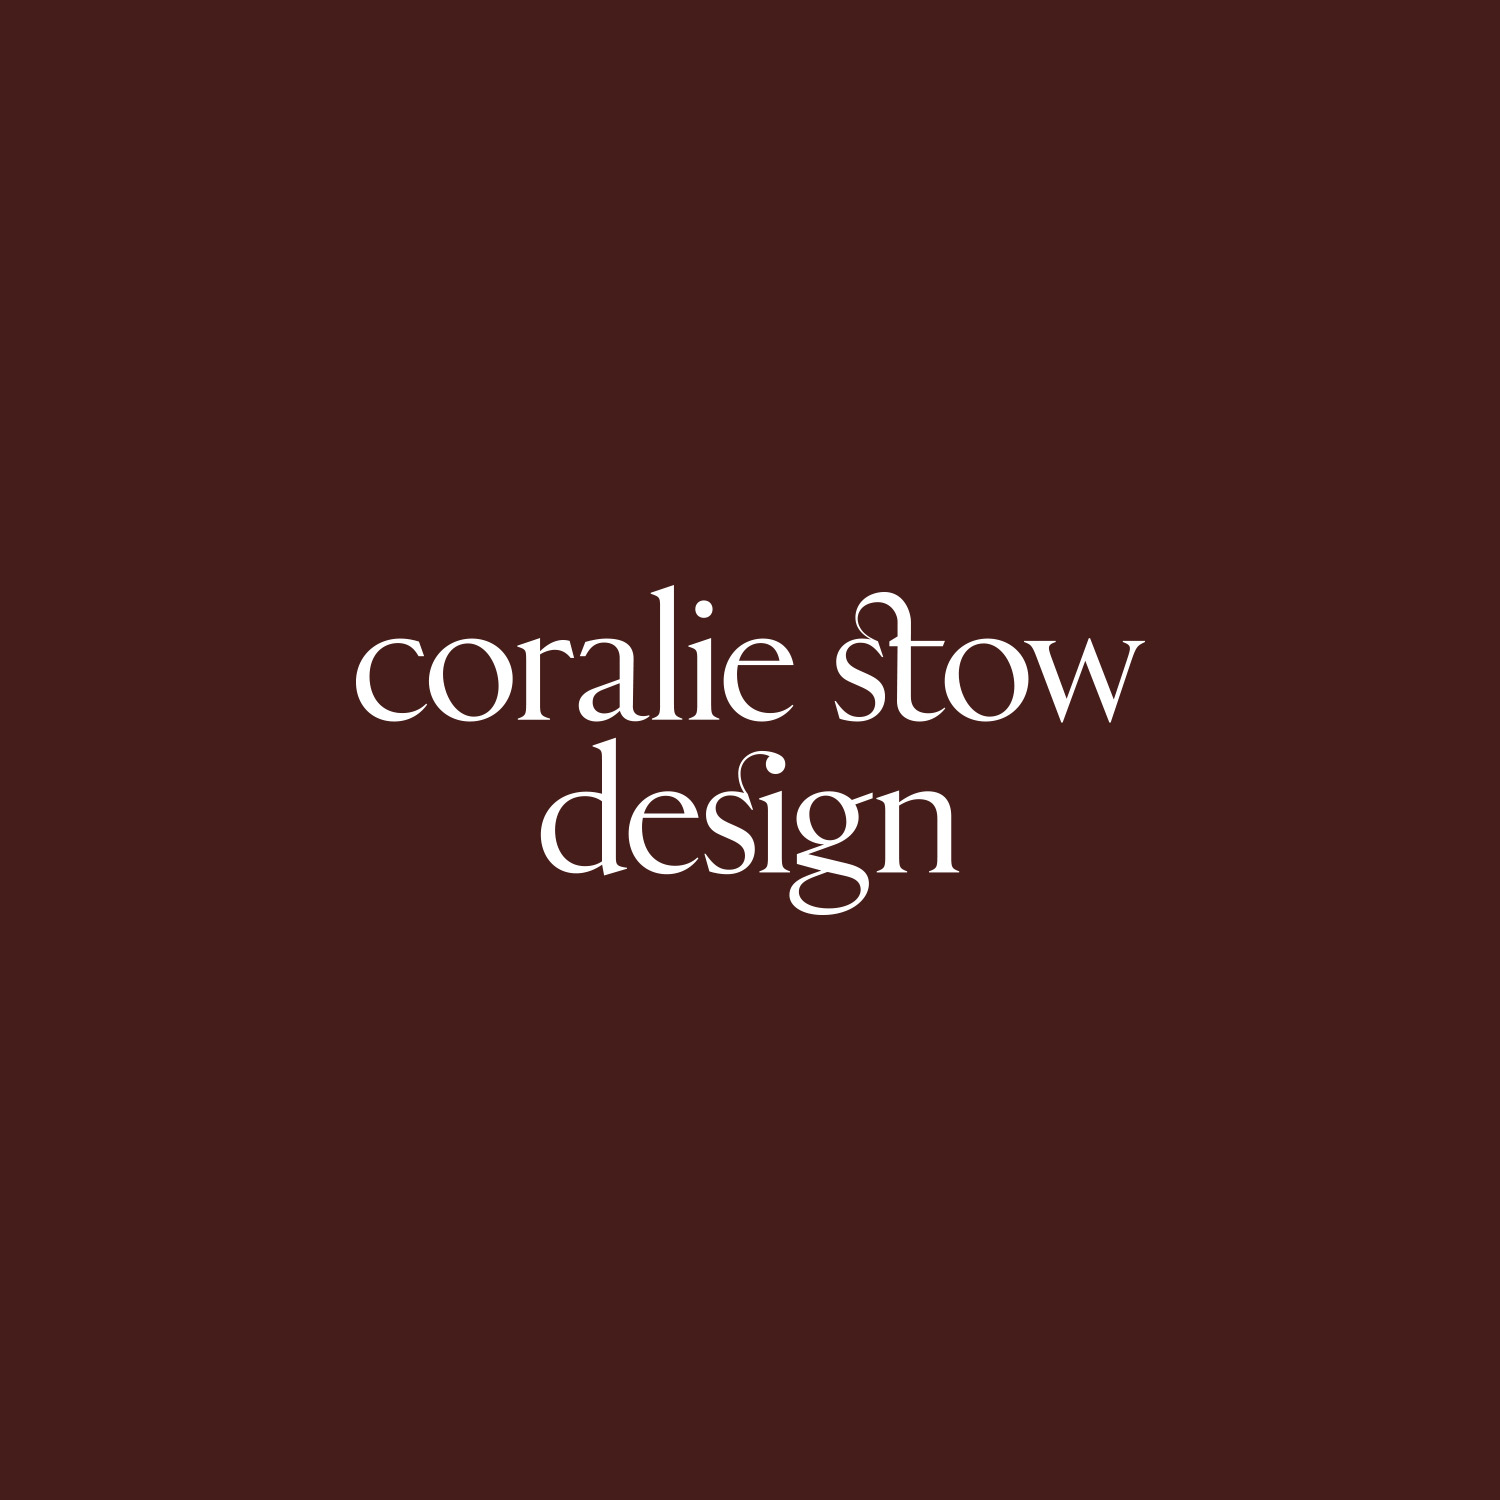 Coralie Stow Design brand identity by Leysa Flores Design